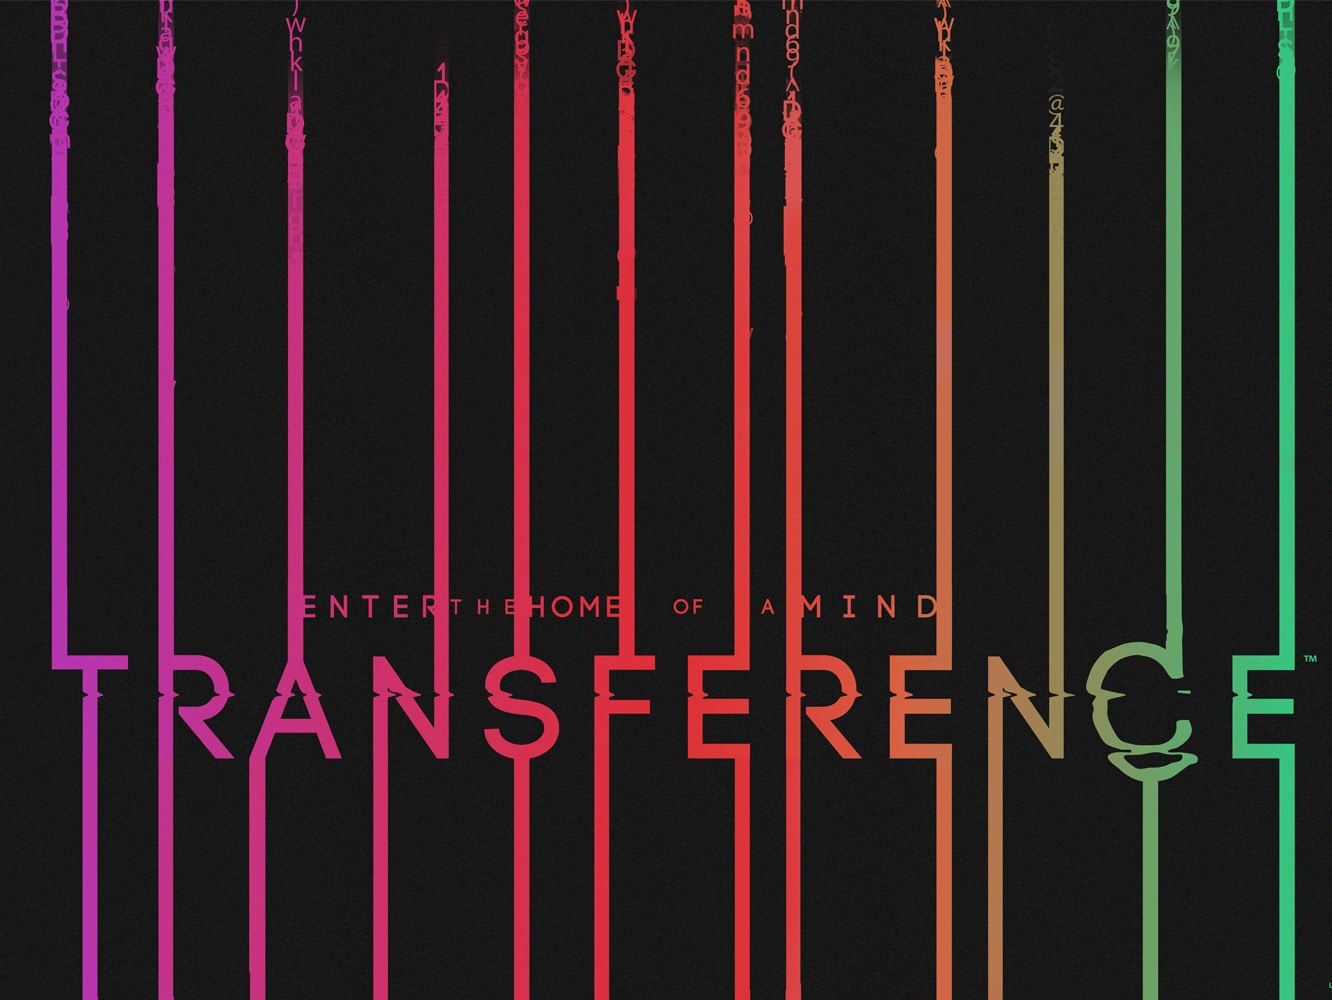 transference demo ps4